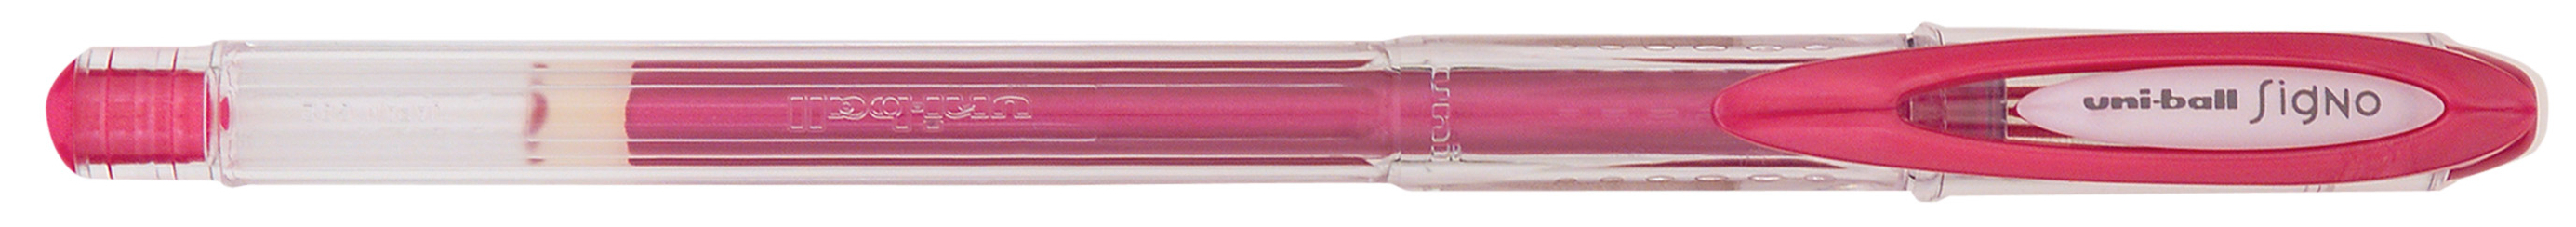 UNI-BALL Signo Noble Metal 0.8mm UM-120NM RED rouge rouge